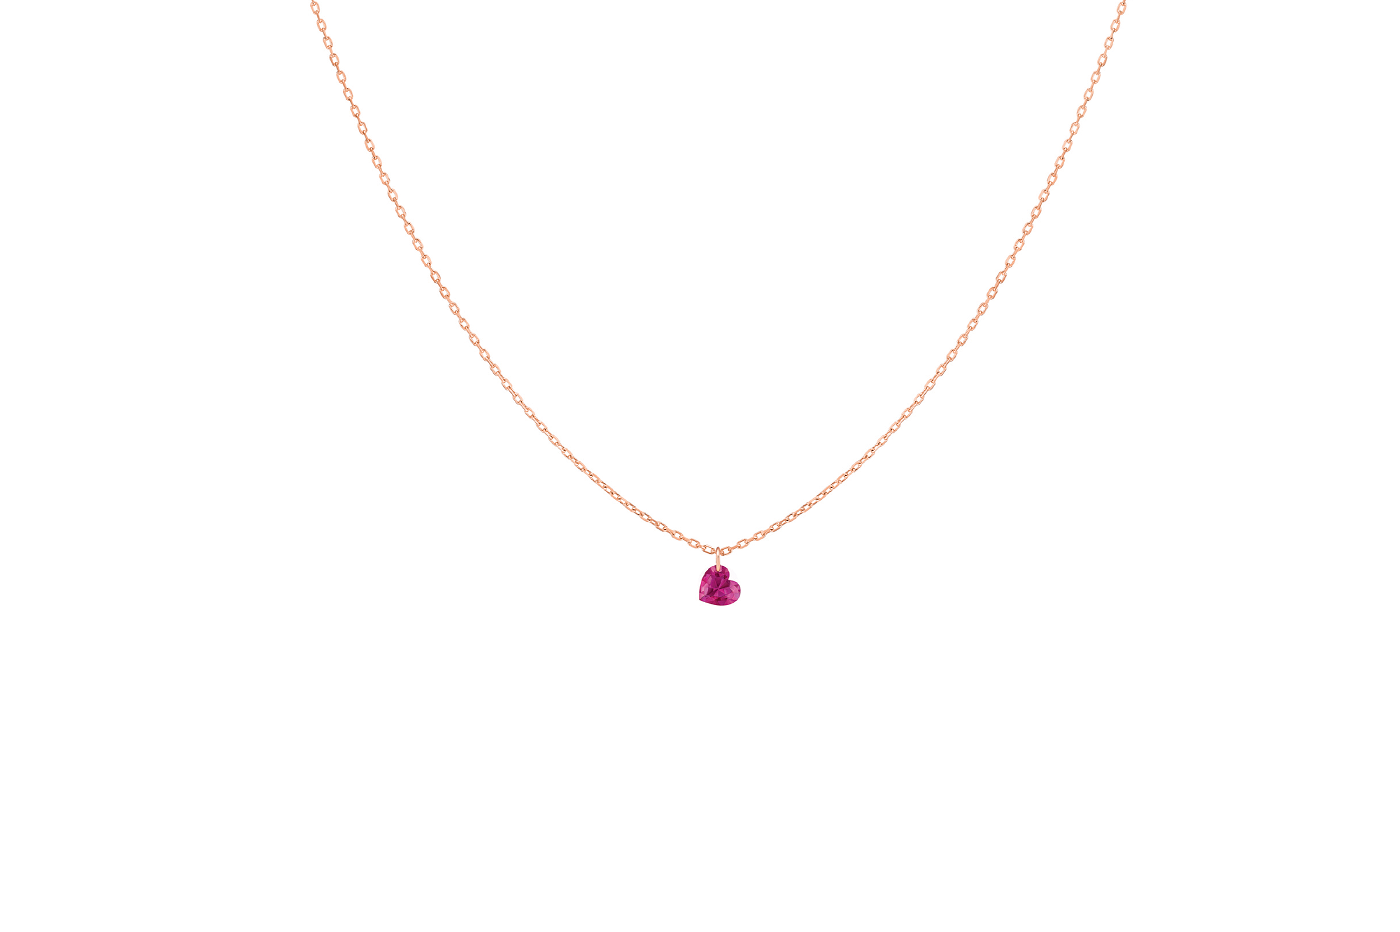 Collier CONFETTI, rubis cœur, 5mm, 0,50 ct approx., or rose 18KT, 1,4gr.